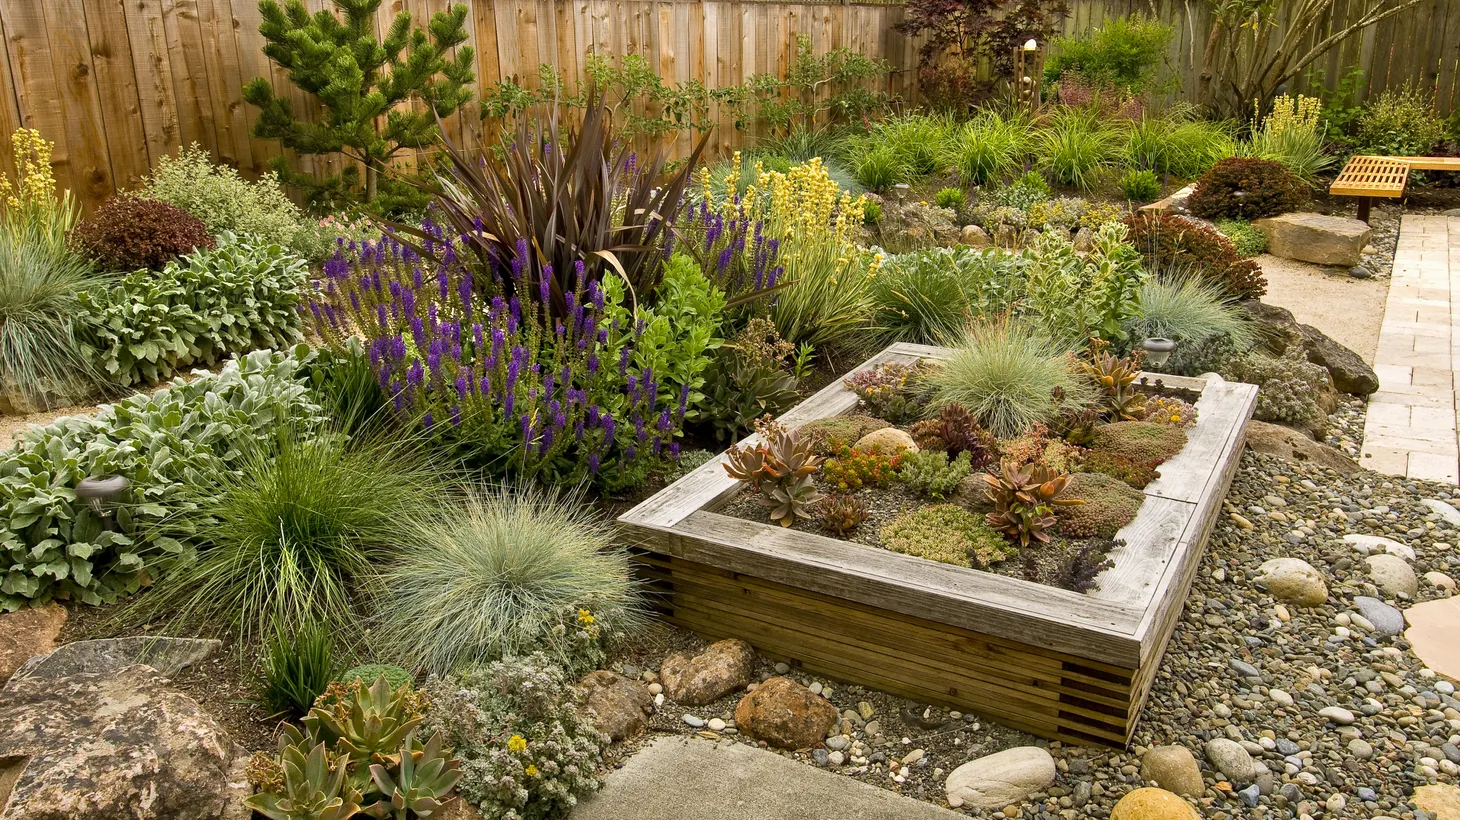 “We can replace [lawns] with native plants and low-water plants that both save water, but also can build habitats and create ecological systems in our urban and suburban spaces that will bring butterflies and hummingbirds and lizards into home gardens and municipal spaces,” says Evan Meyer, the executive director of the Theodore Payne Foundation.